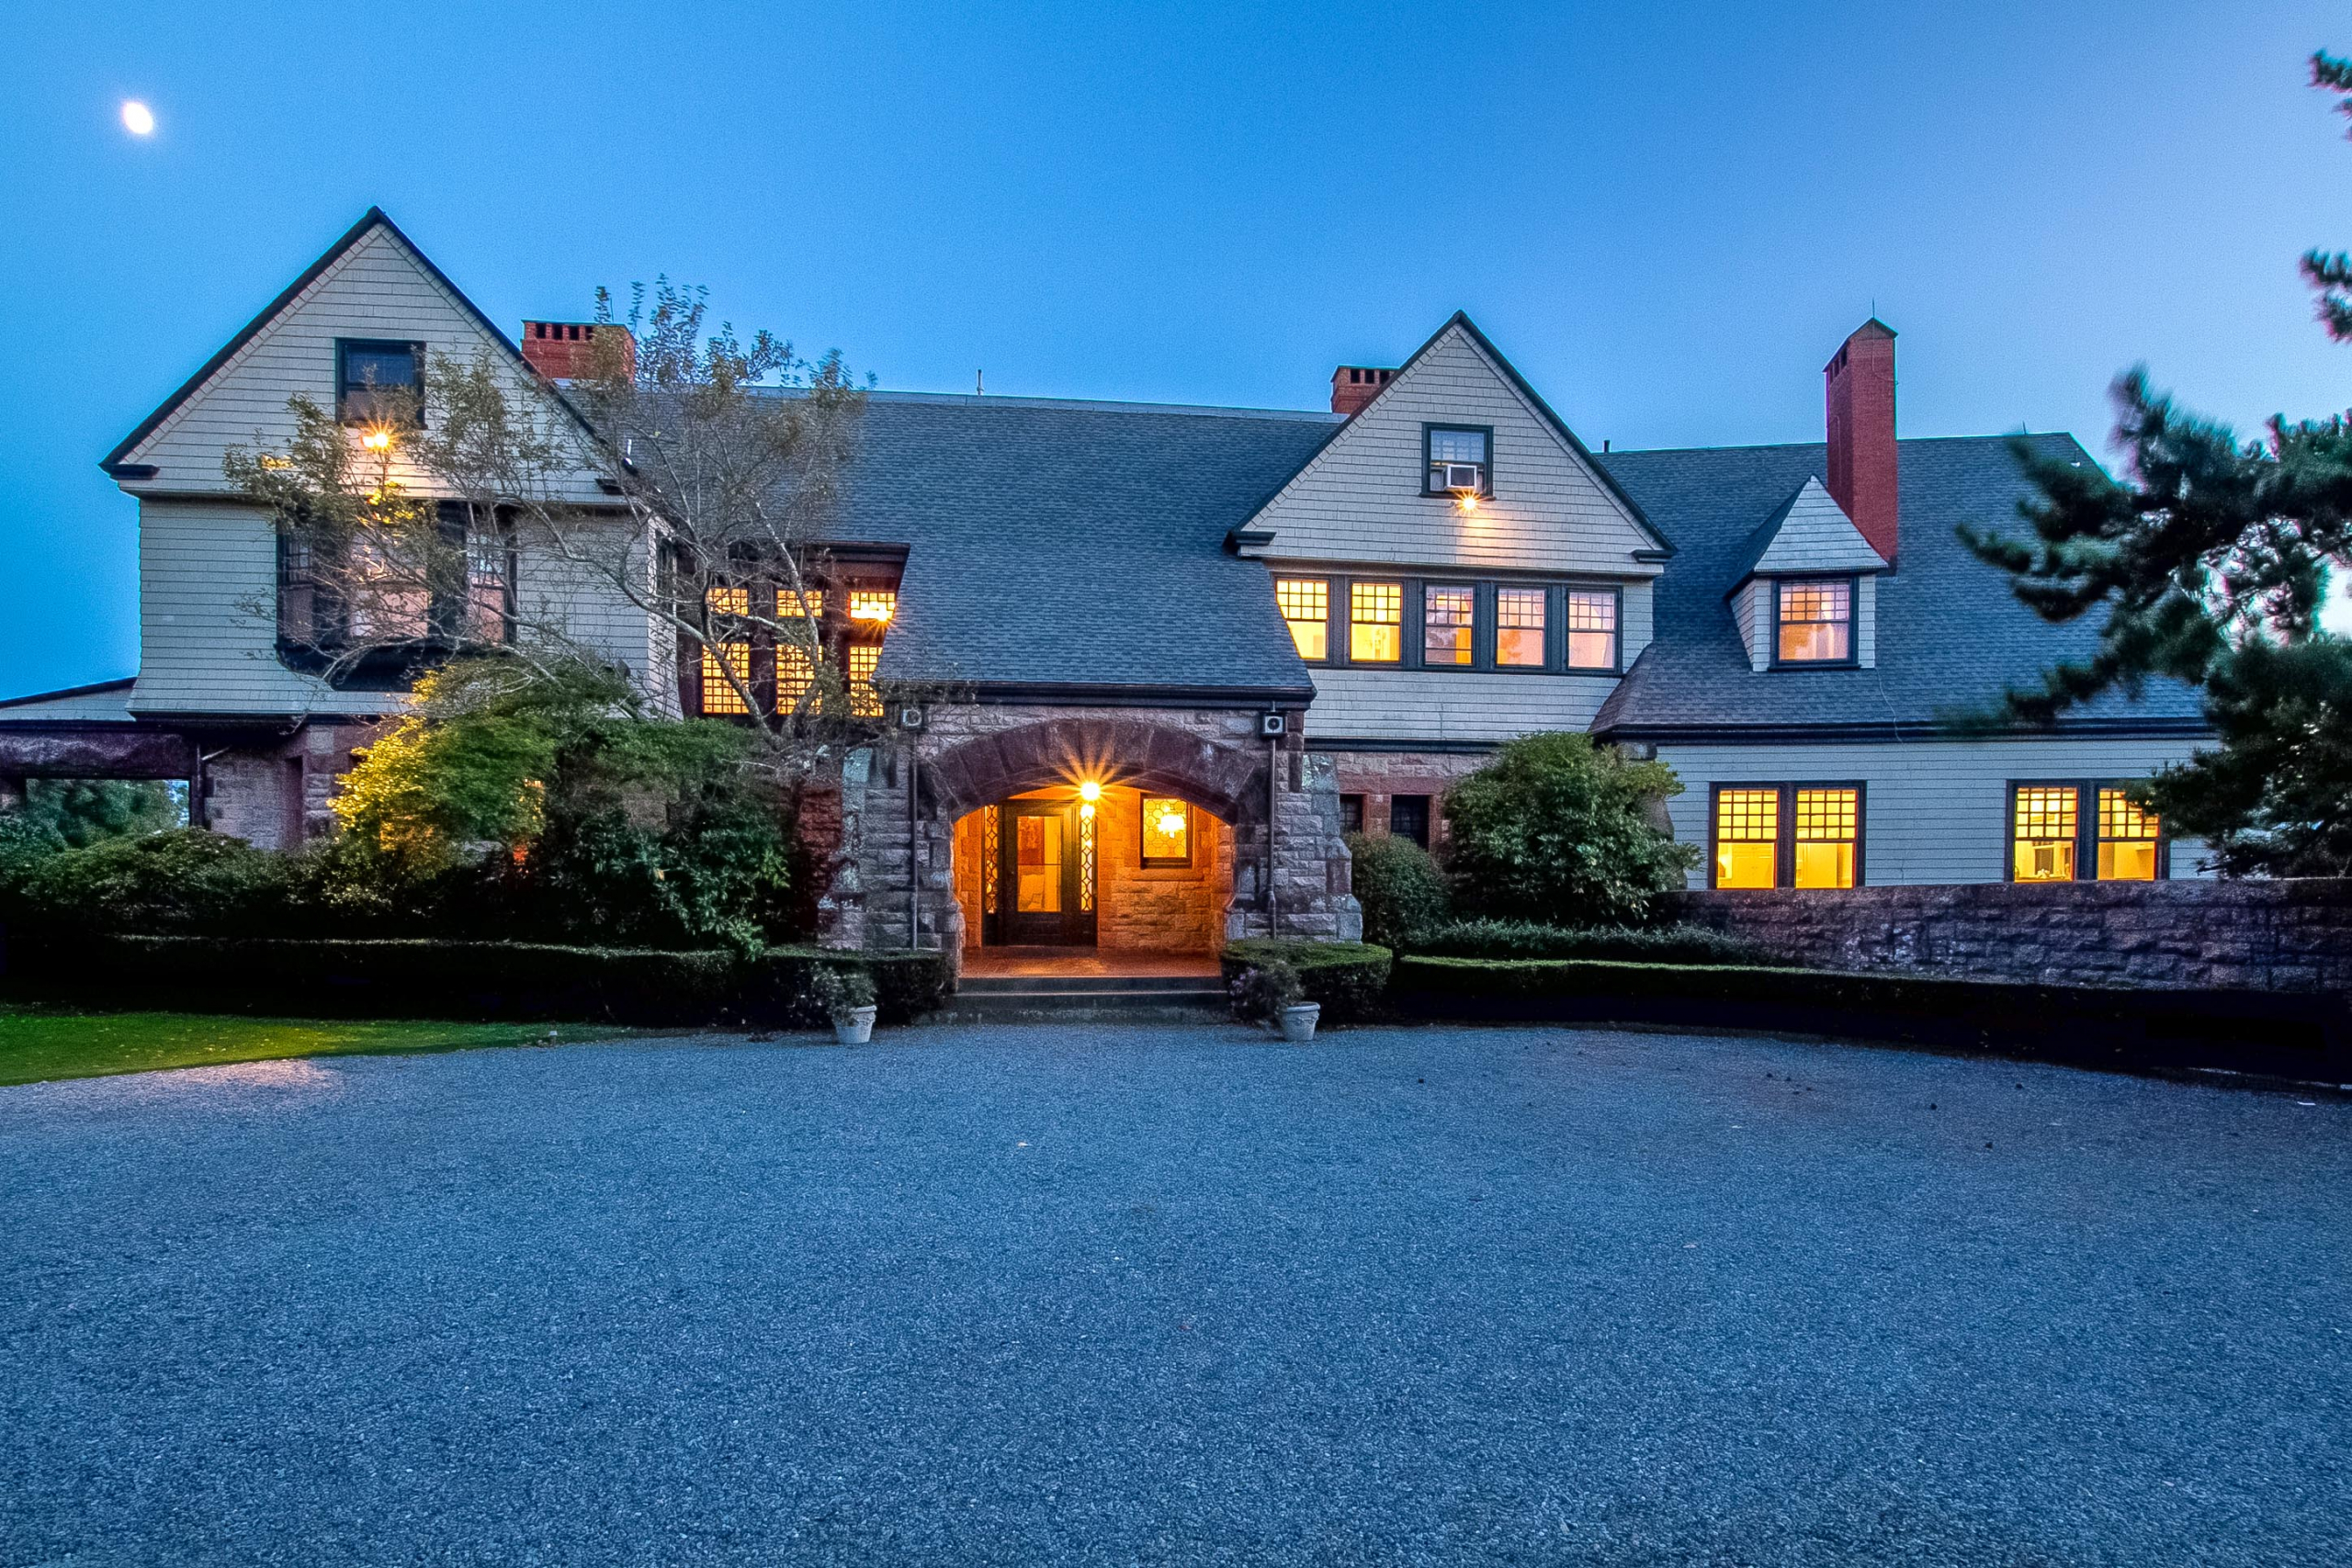 CLIFF WALK ESTATE SELLS FOR $9,391,635,  MARKING HIGHEST SALE IN NEWPORT COUNTY YEAR-TO-DATE*